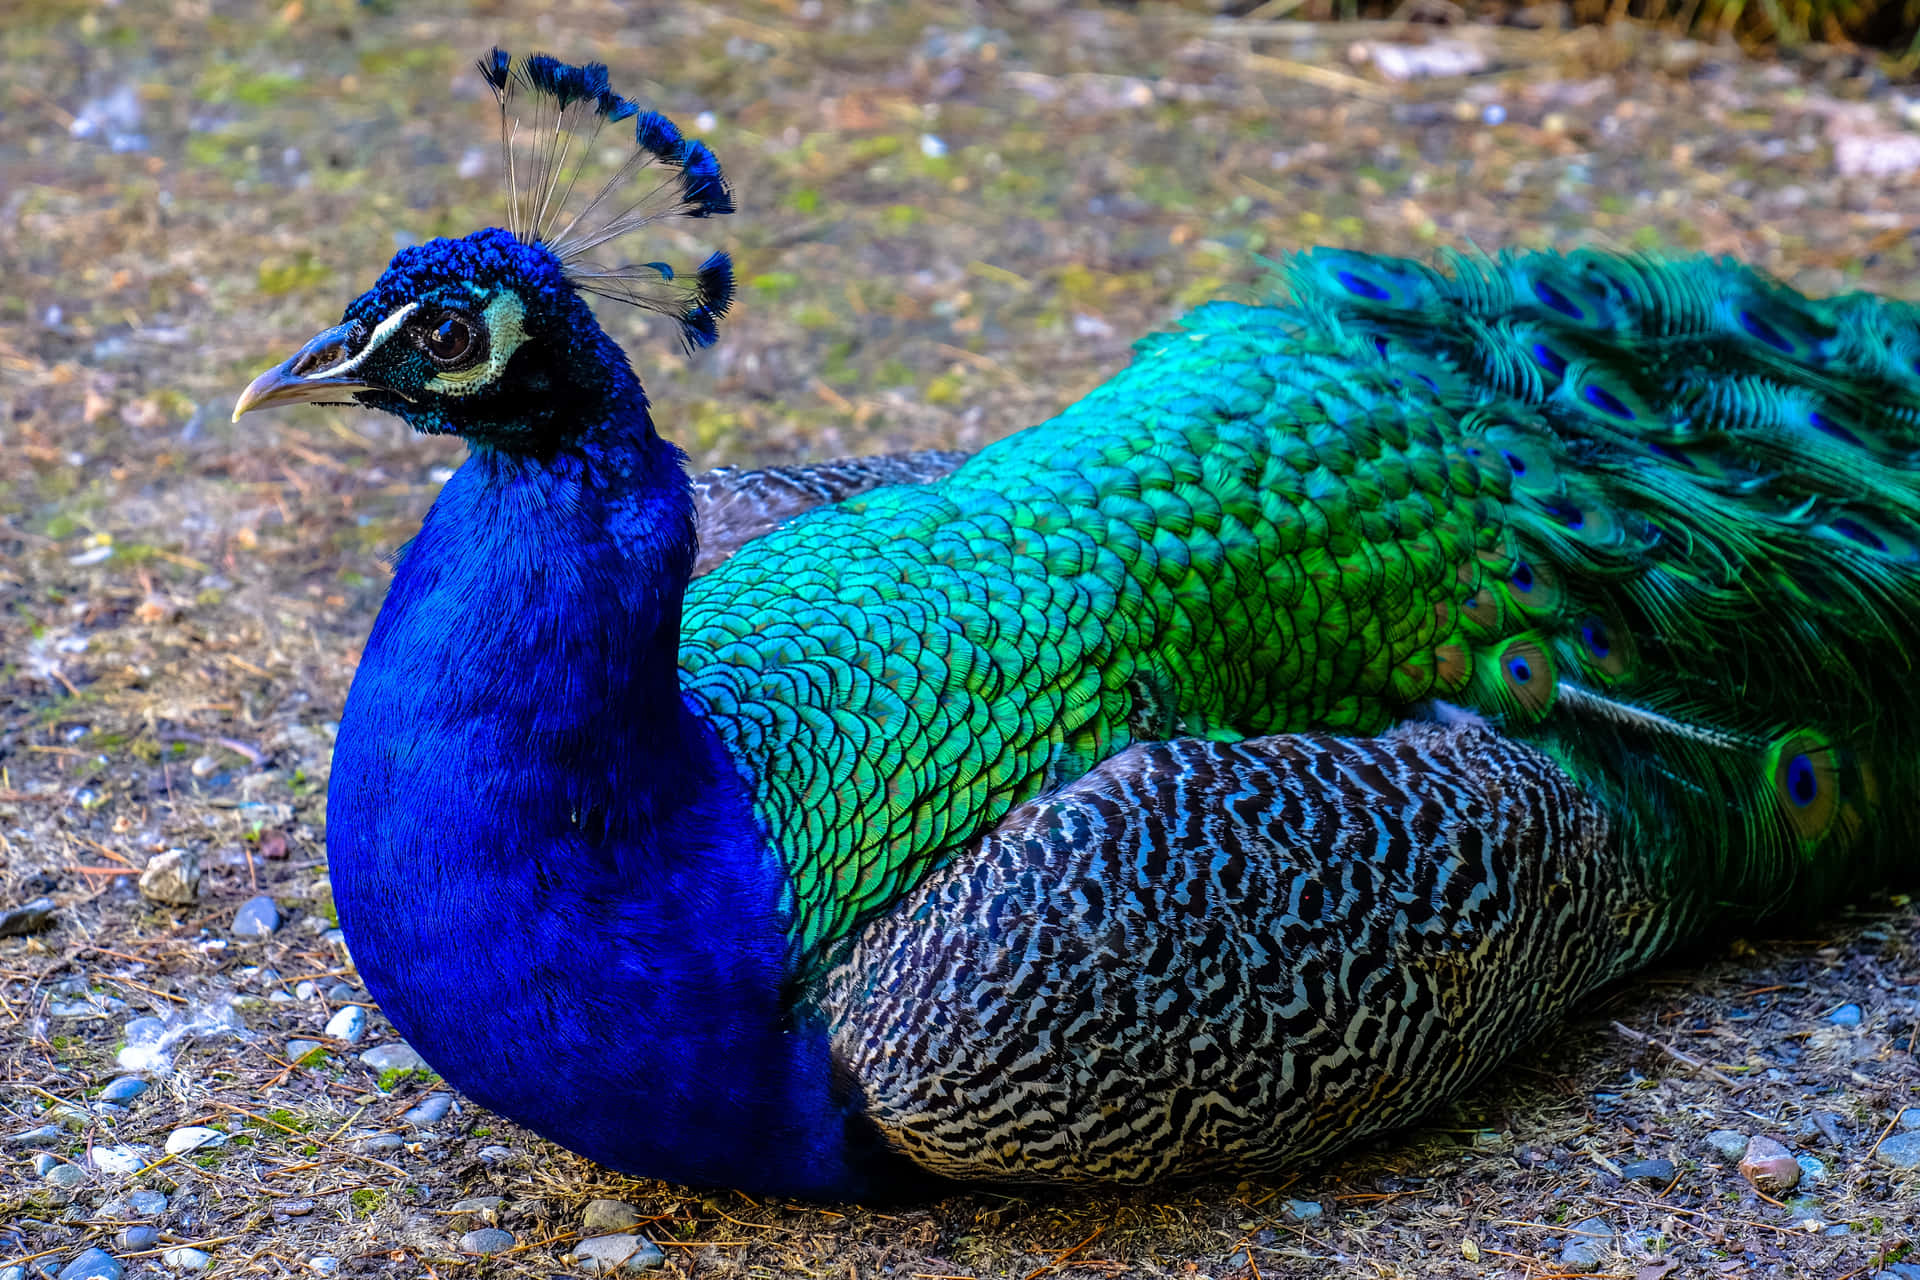 An elegant and graceful peacock flaunts its majestic plumage.